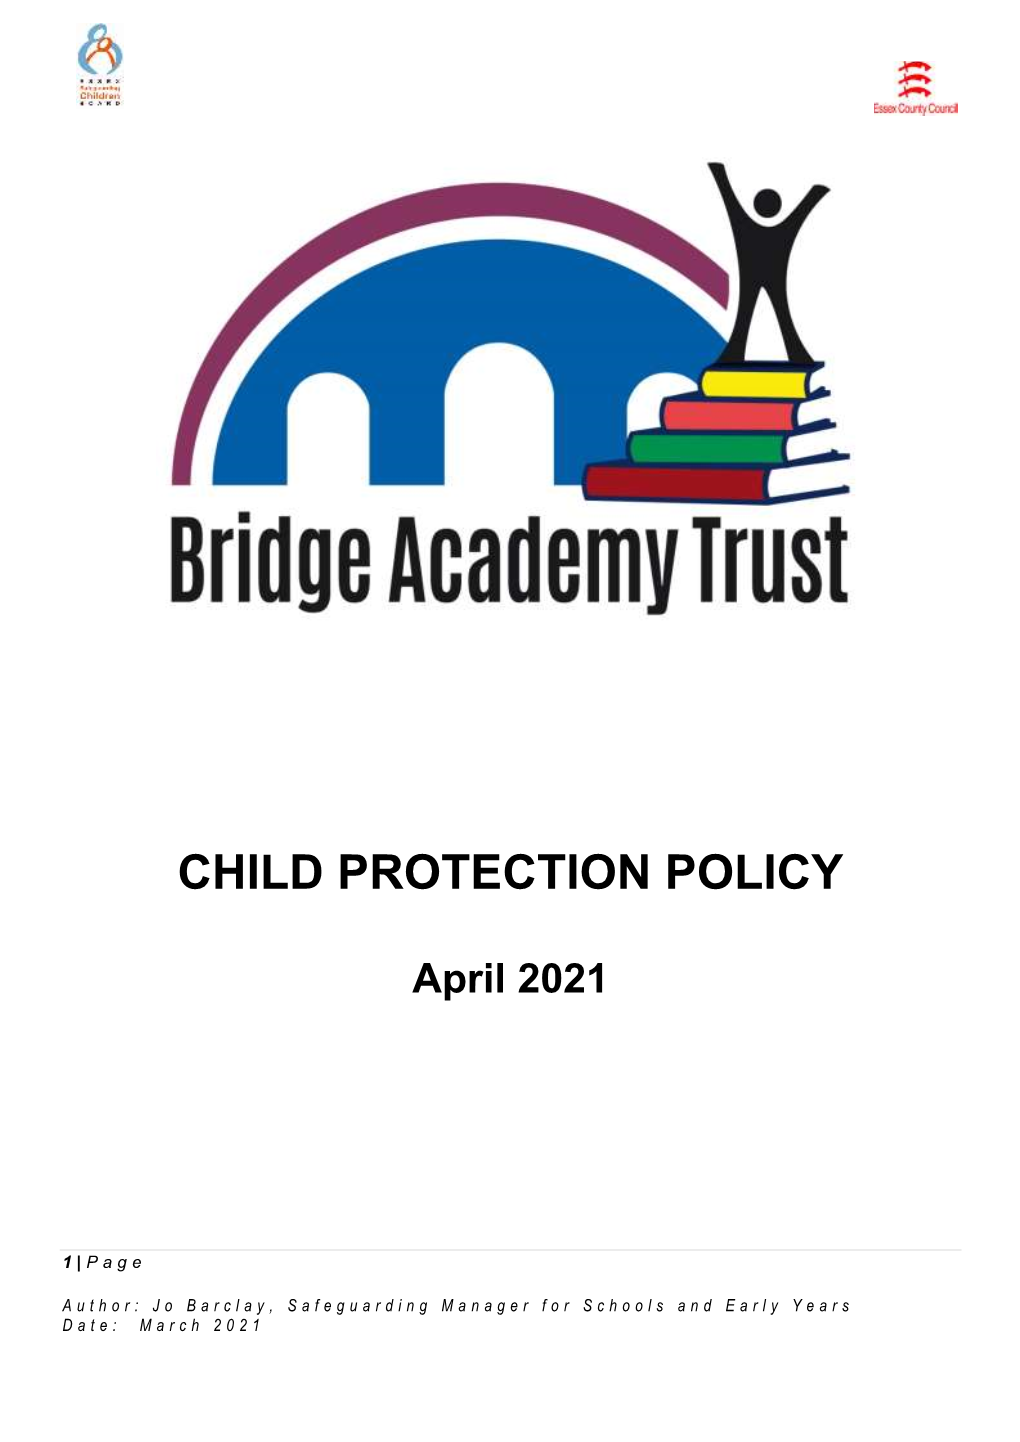 Download Child Protection Policy